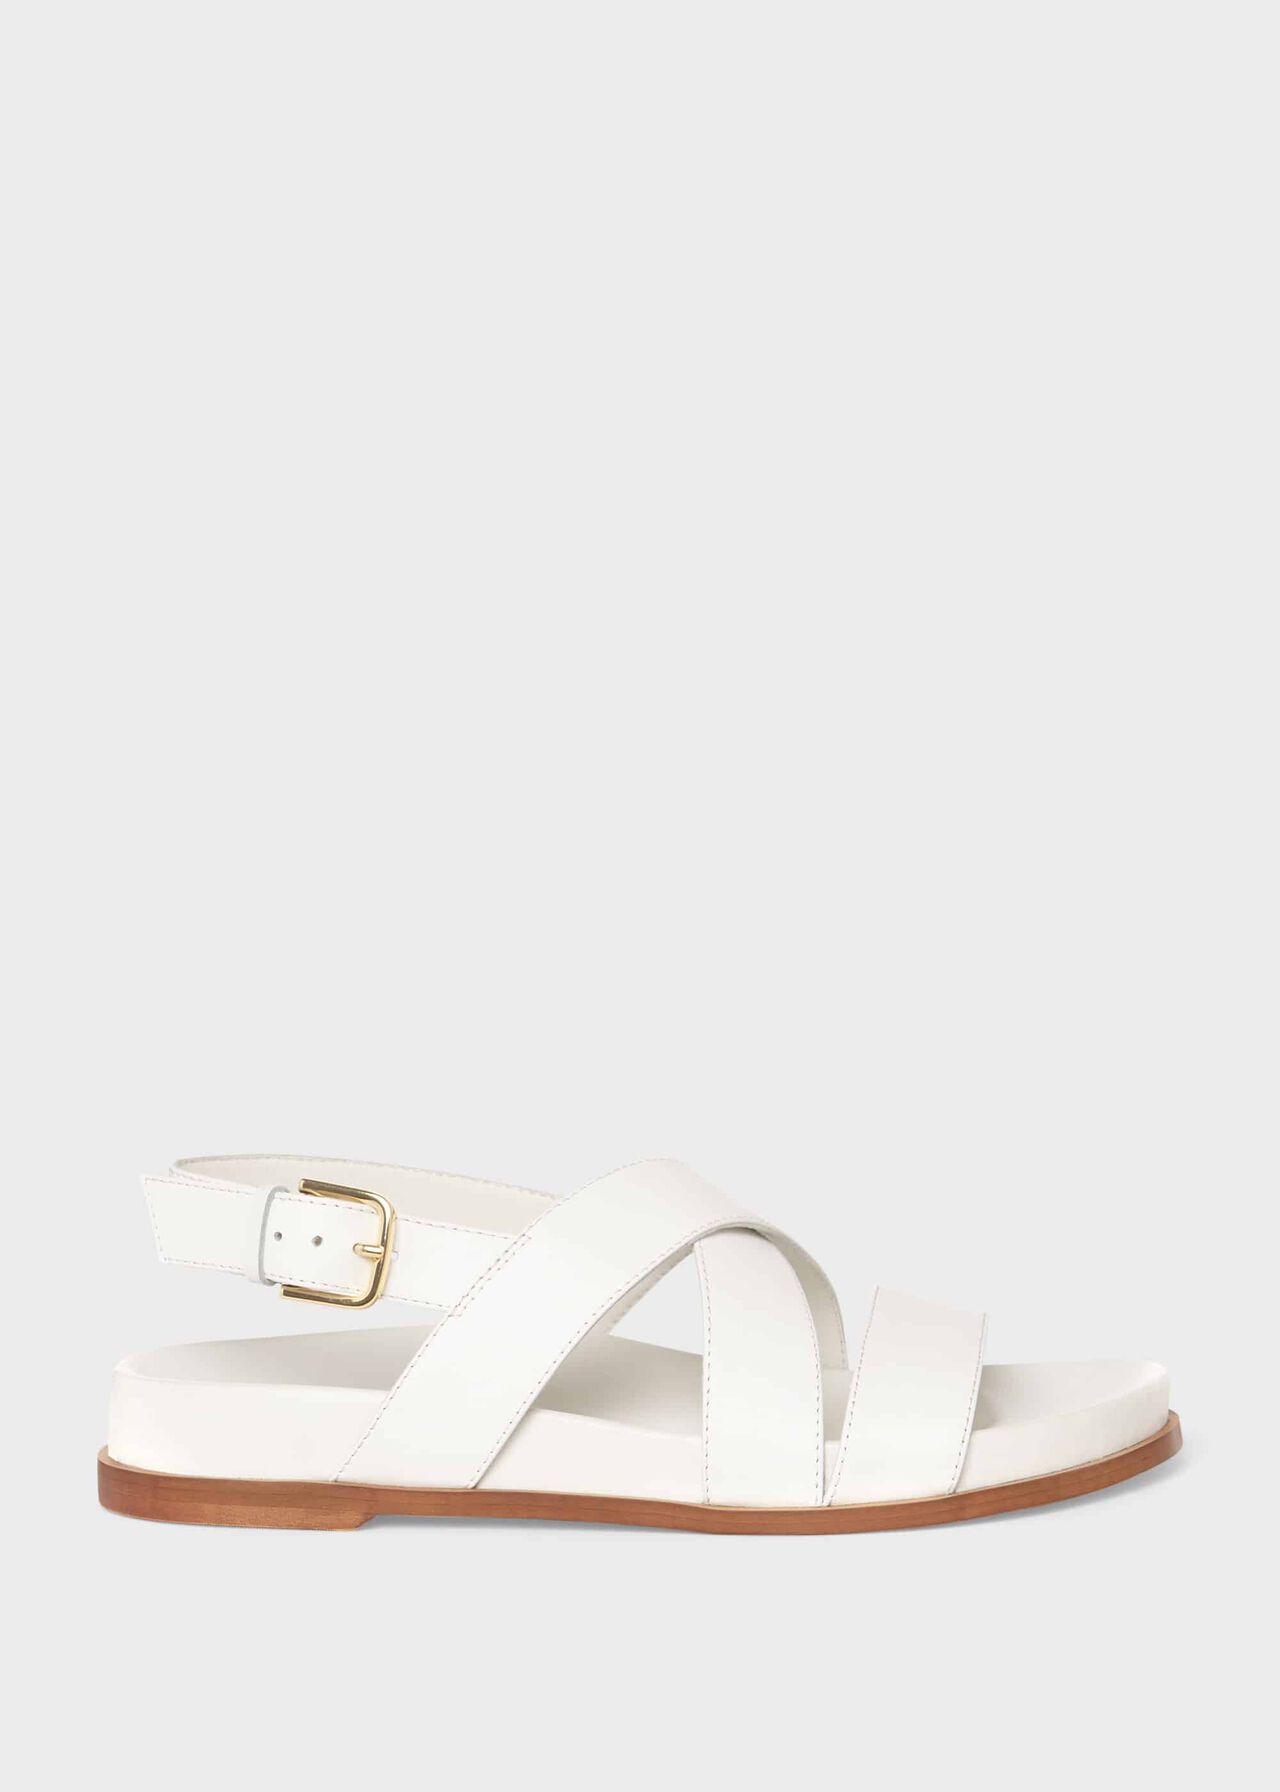 Clementine Leather Sandal, White, hi-res